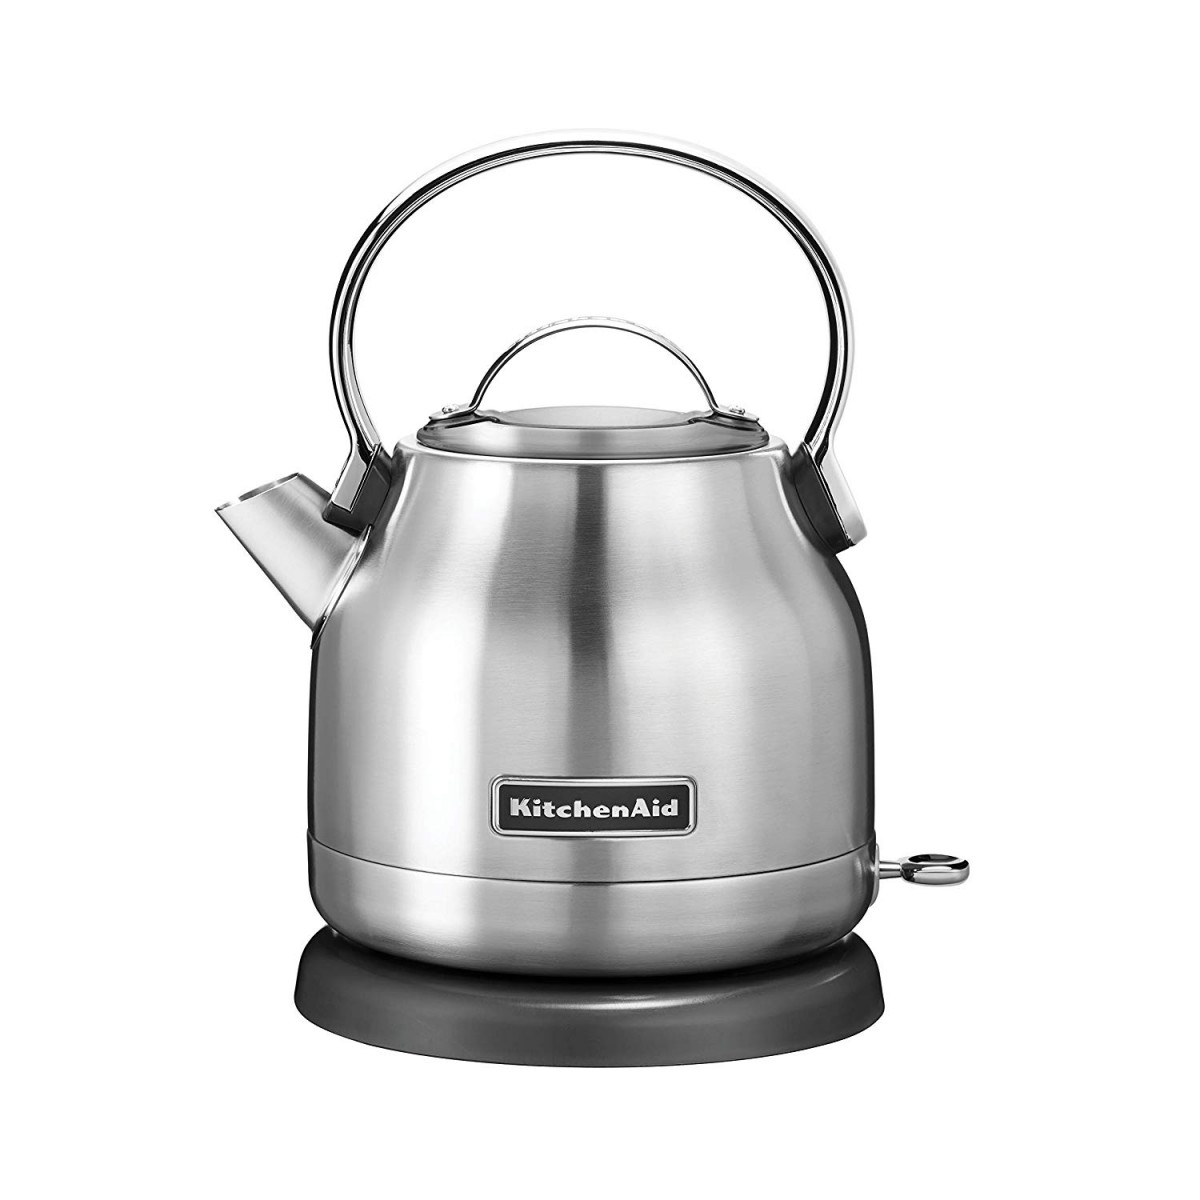 Kitchenaid Temperature Controlled Kettle Review and Features 